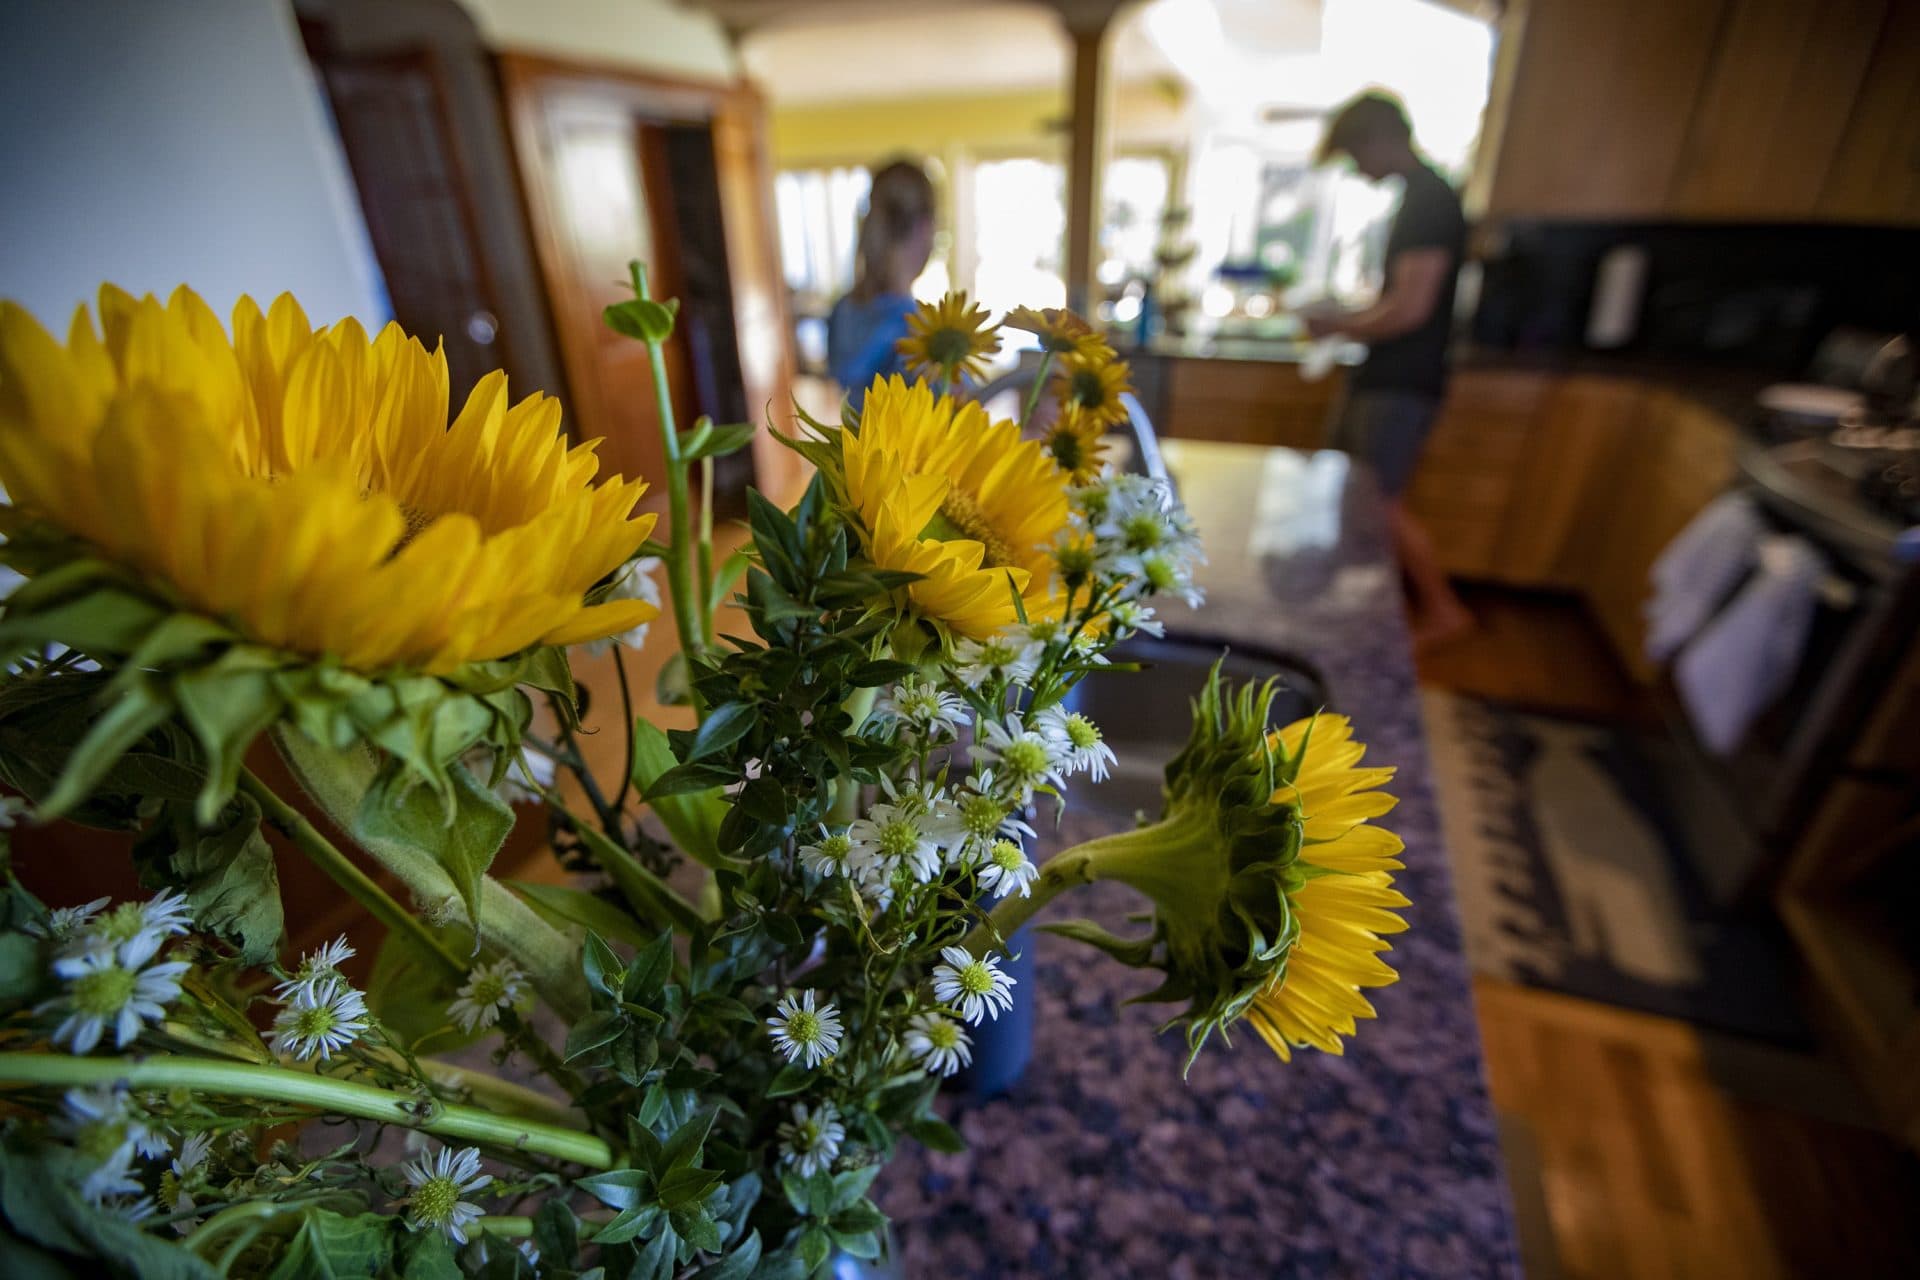 An arrangement of flowers sits in the kitchen as Karen Marmai and her son, Jackson, prepare lunch. (Jesse Costa/WBUR)